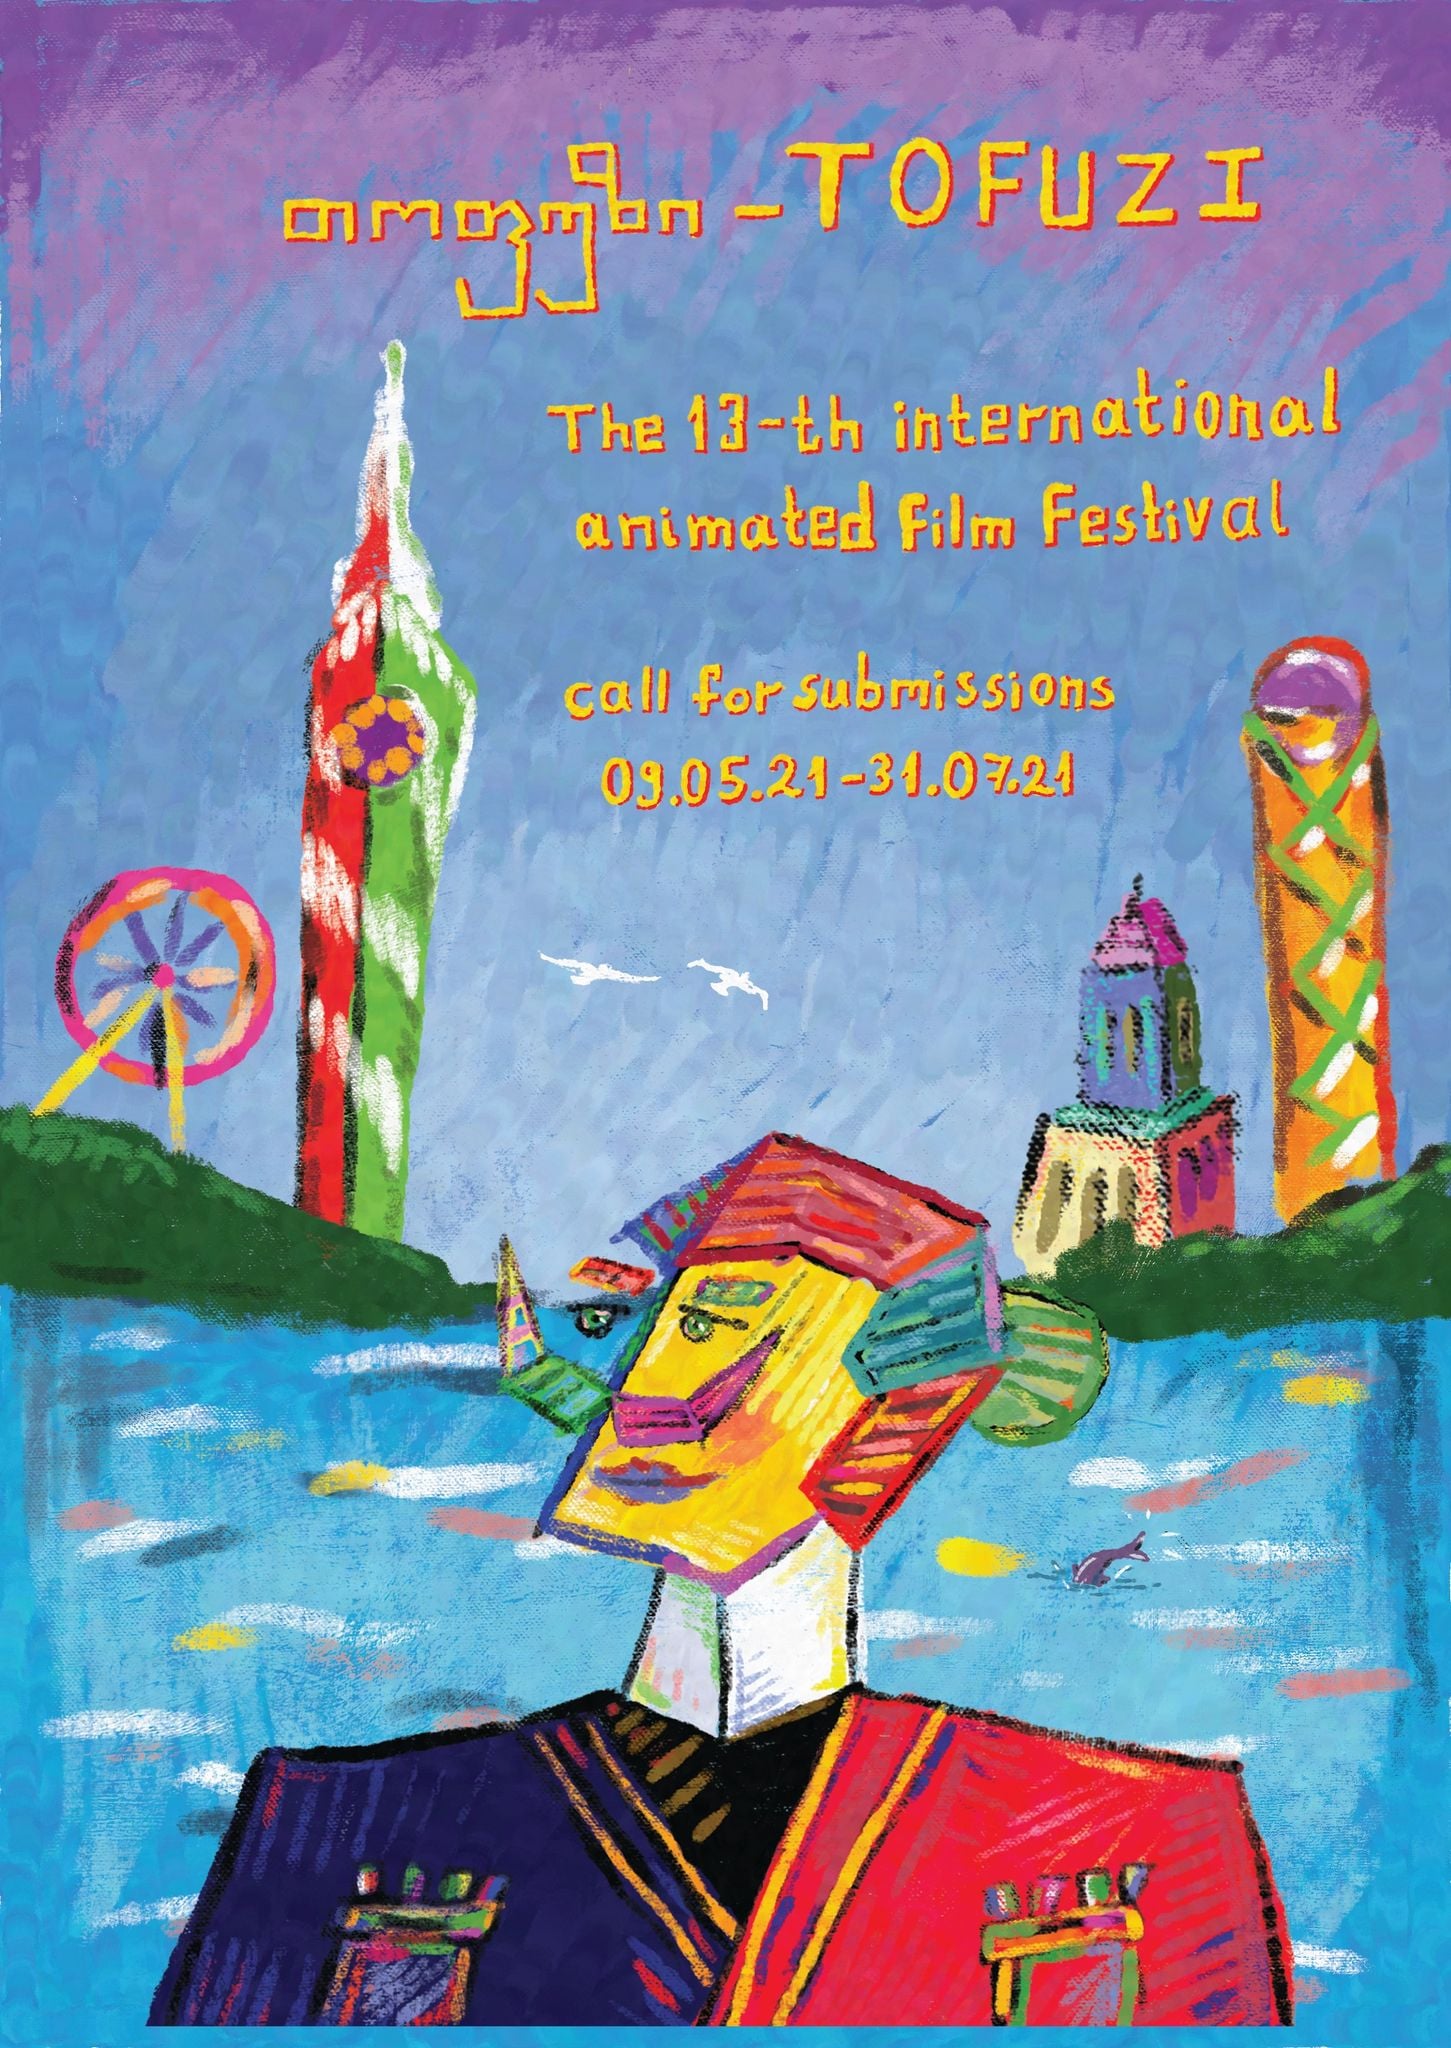 Call for entries for International Animated Film Festival TOFUZI 2021